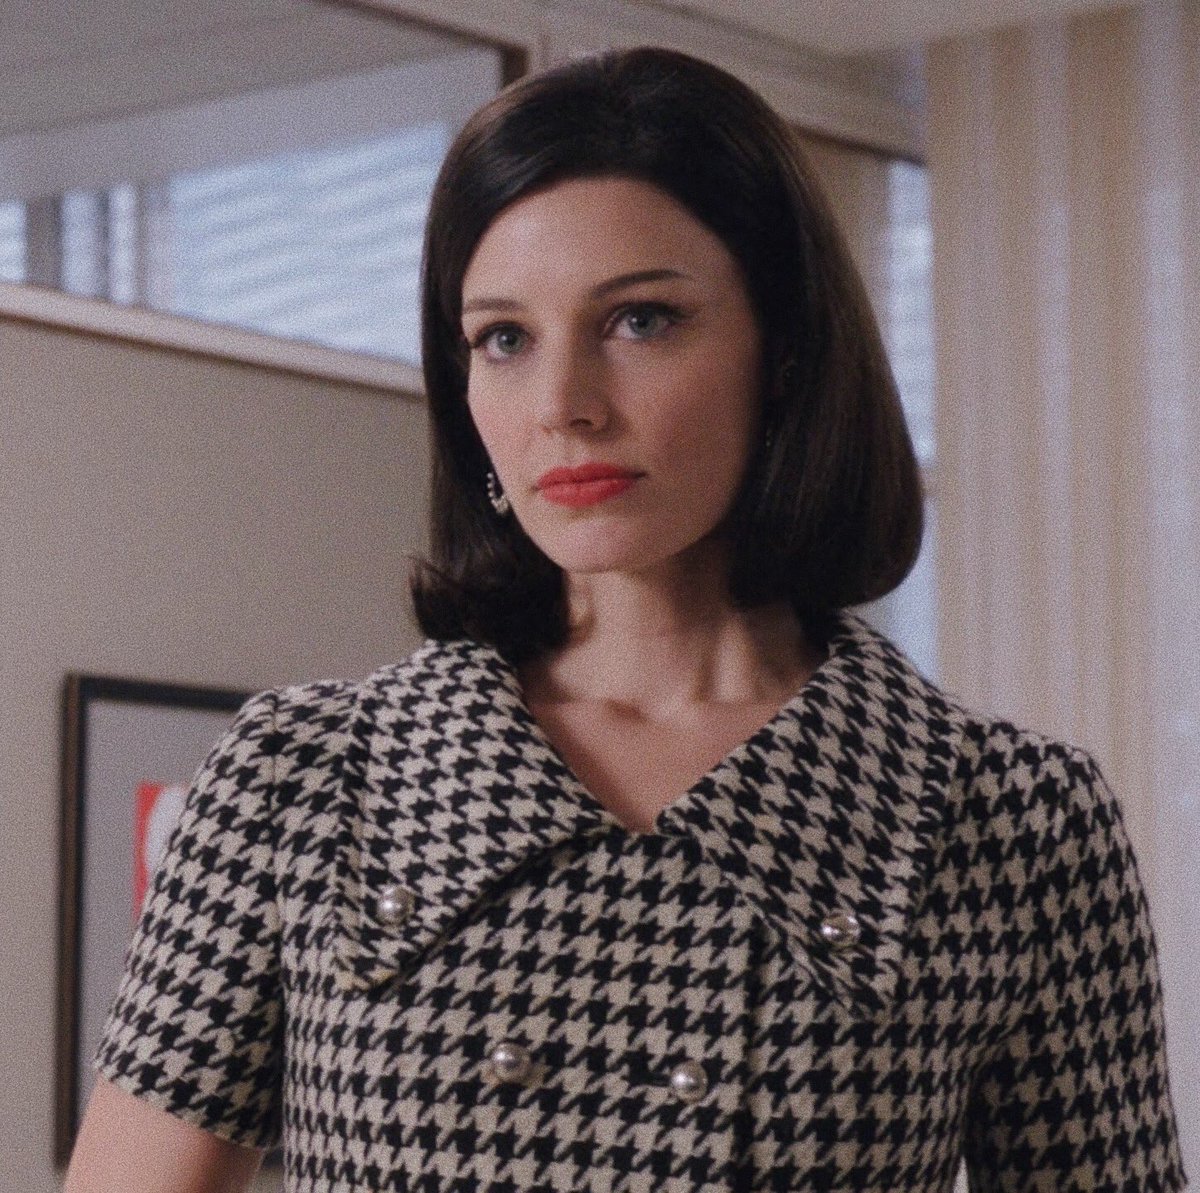 Megan Draper, neé Calvert, is also UR but not in the same way Peggy is. Warm, talented and stylish, Megan captures Don's attention with her idealism, looks and passion. However, her lack of pragmatism ultimately becomes her downfall as her acting dreams dissolve into thin air. 7/